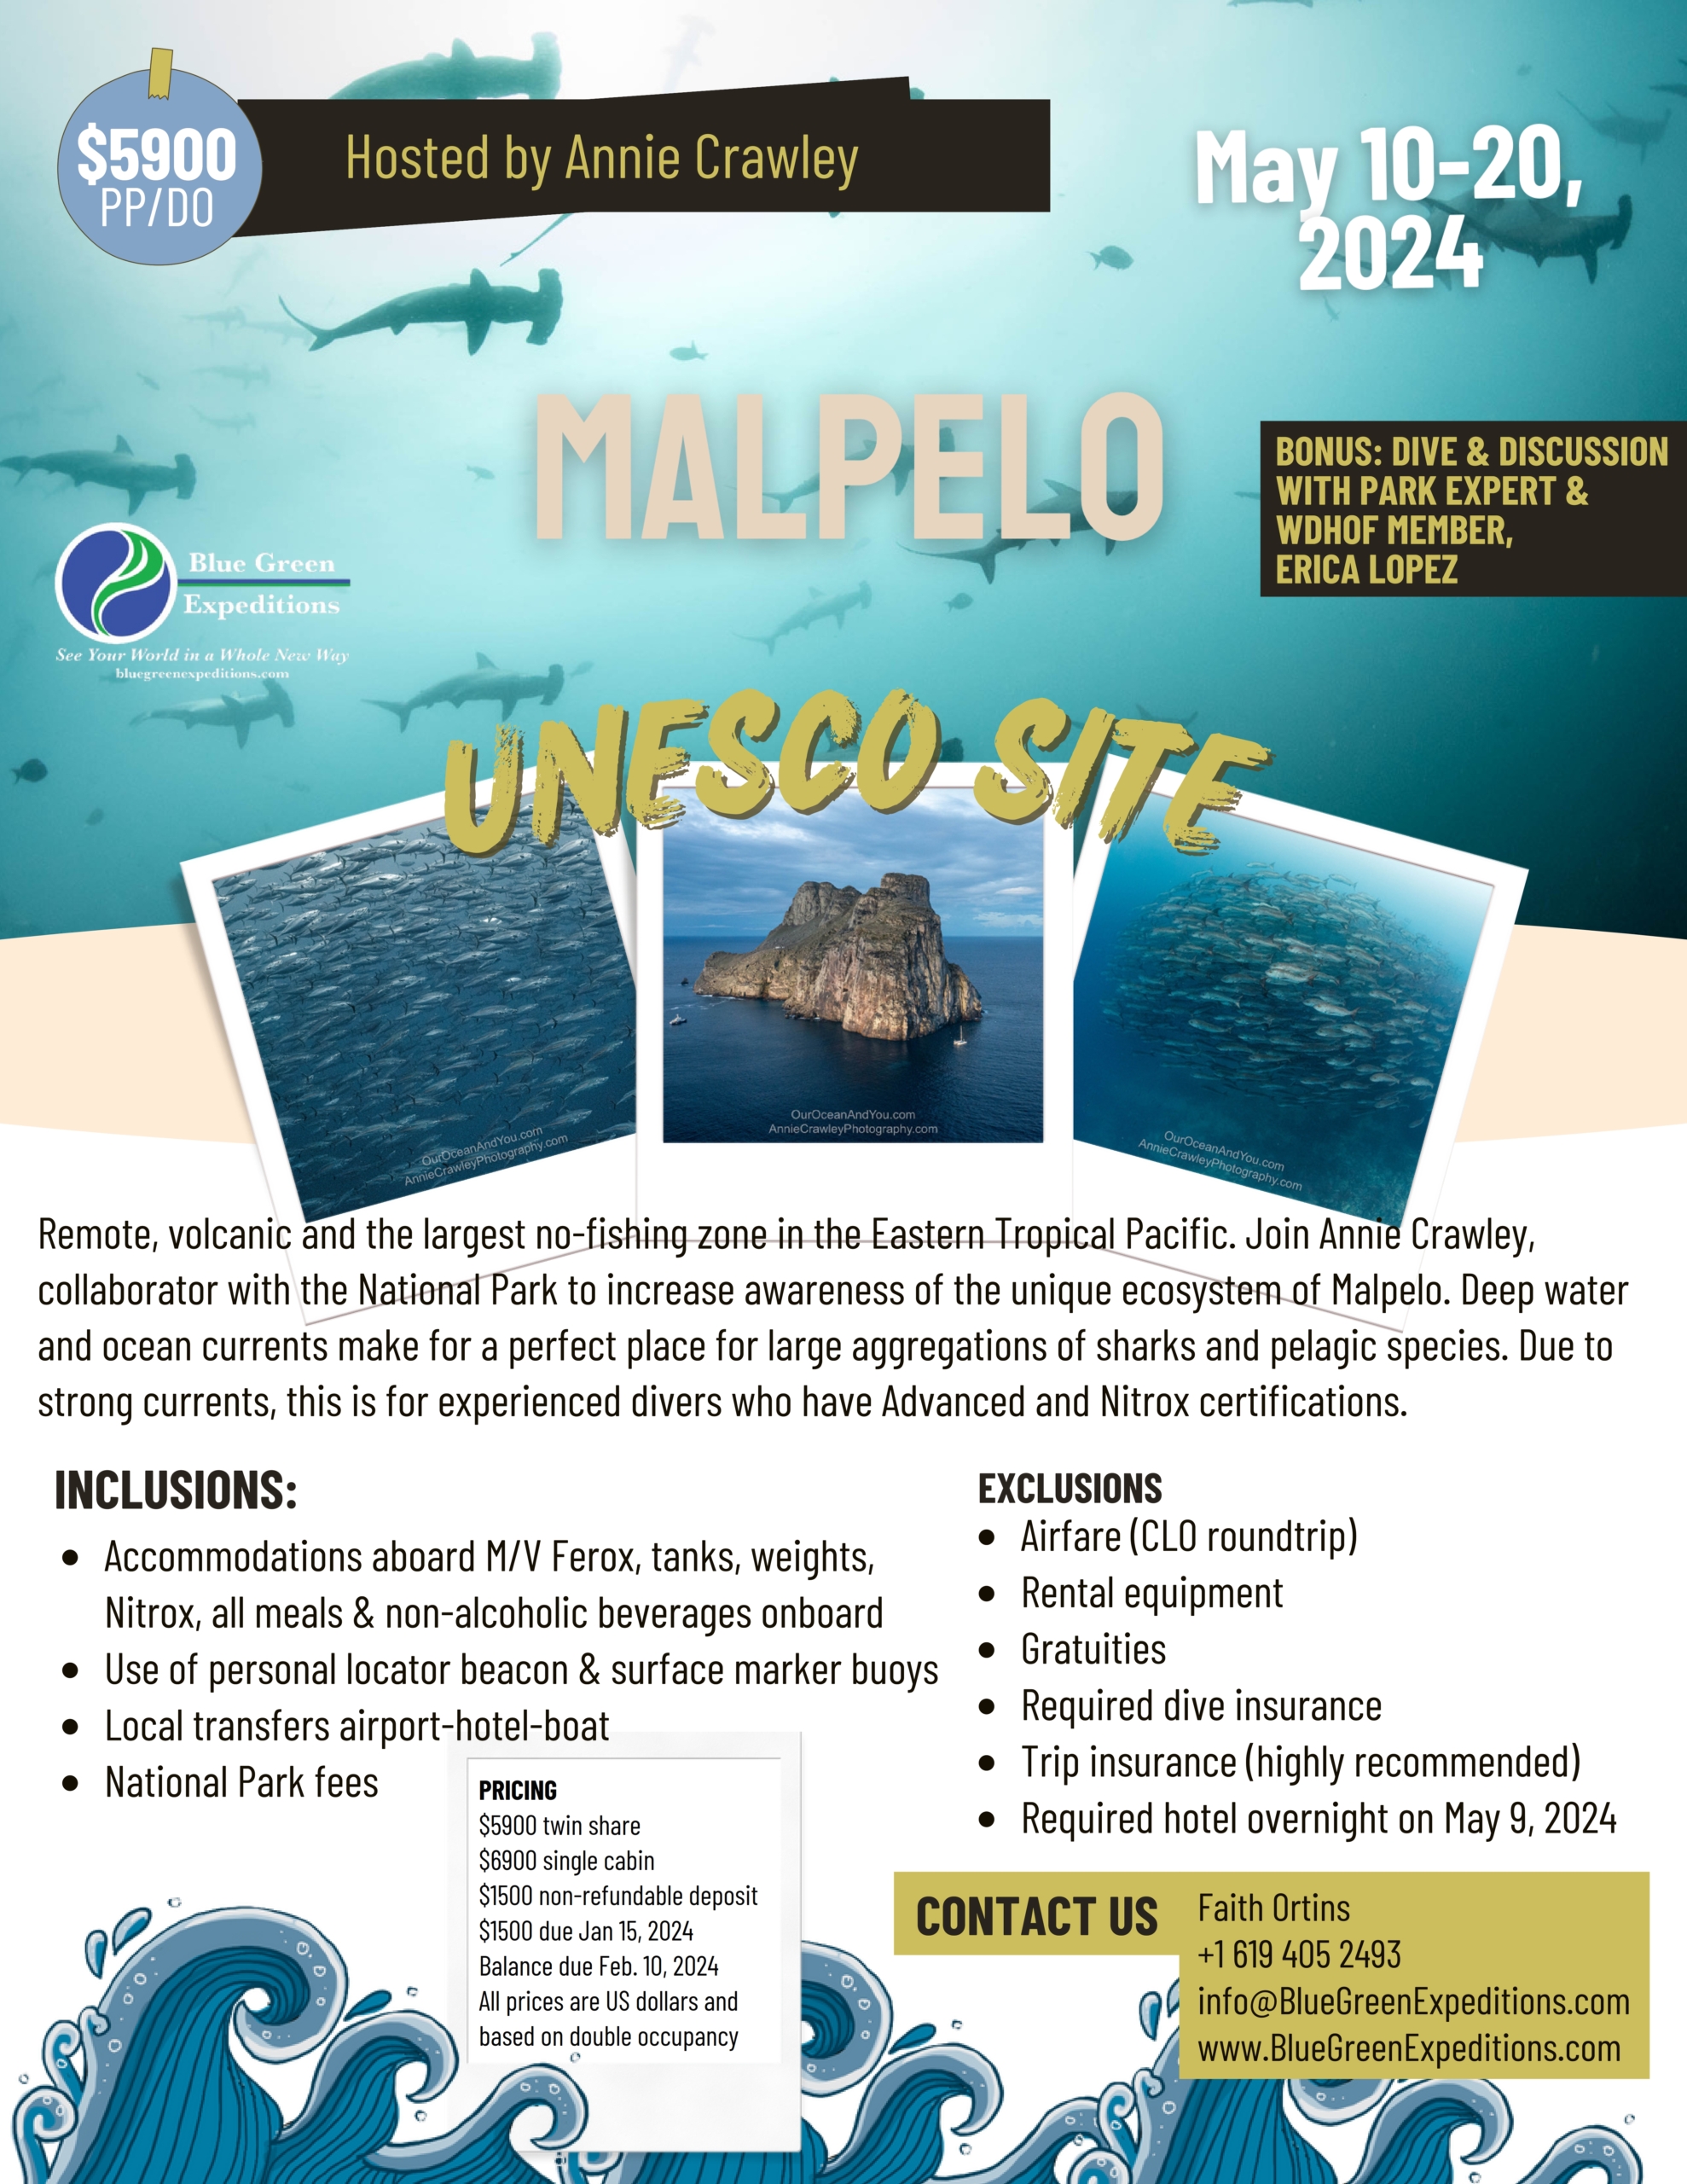 Malpelo , May 10 - May 20, 2024. Expedition description and pricing.